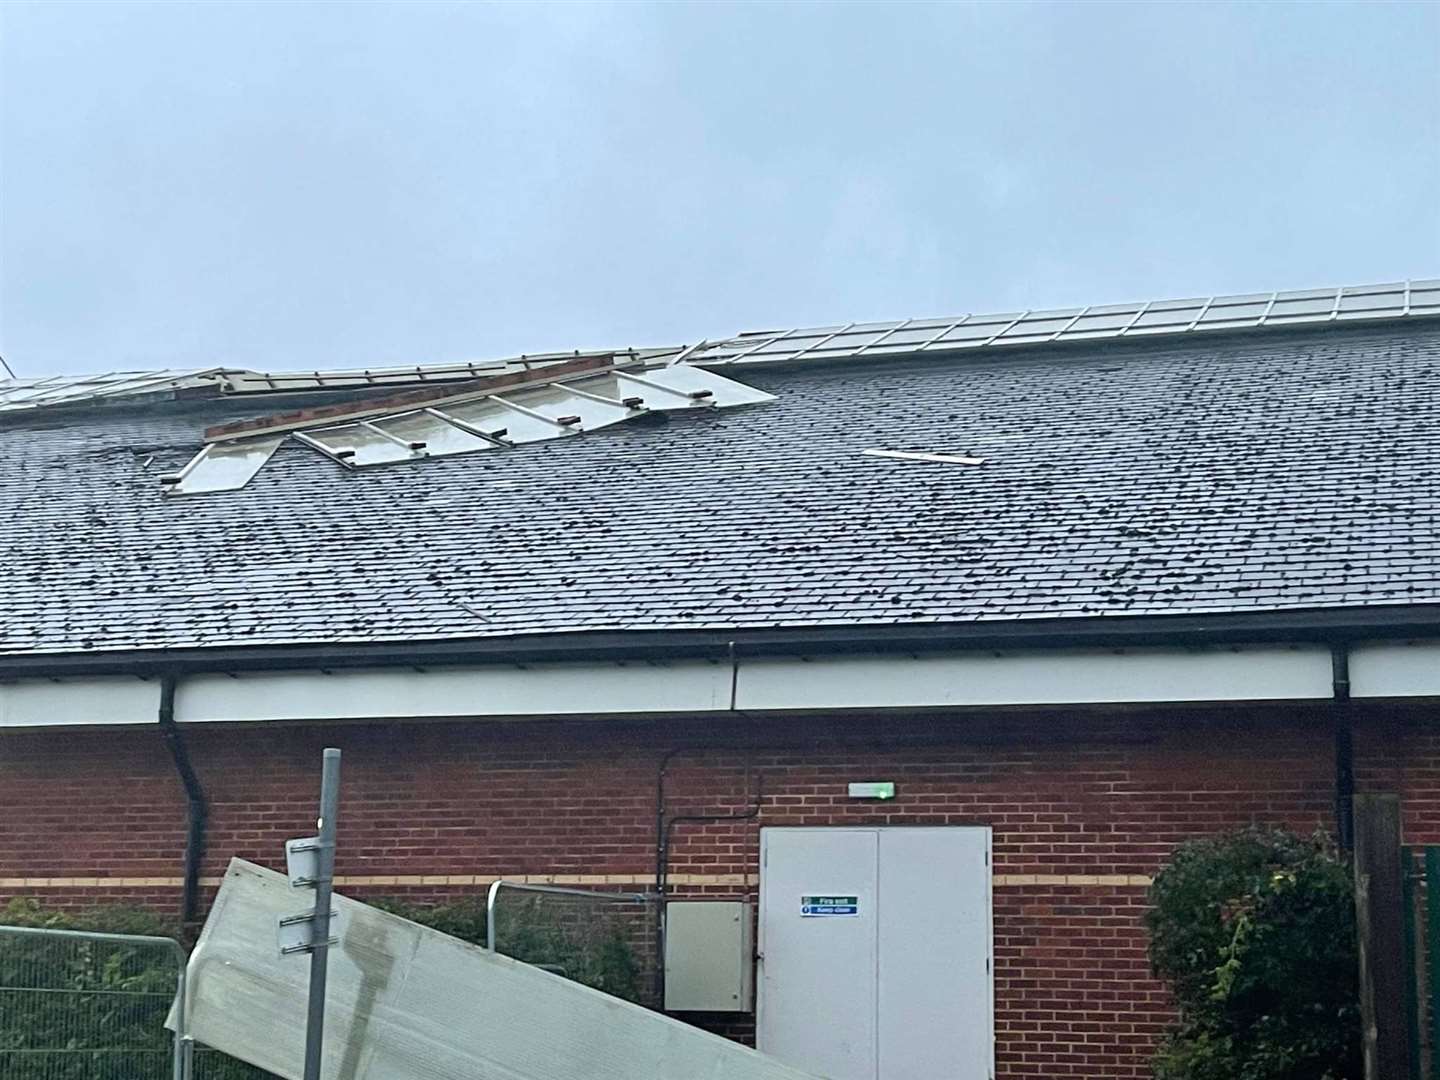 A section of the roof was torn off in stormy weather in October